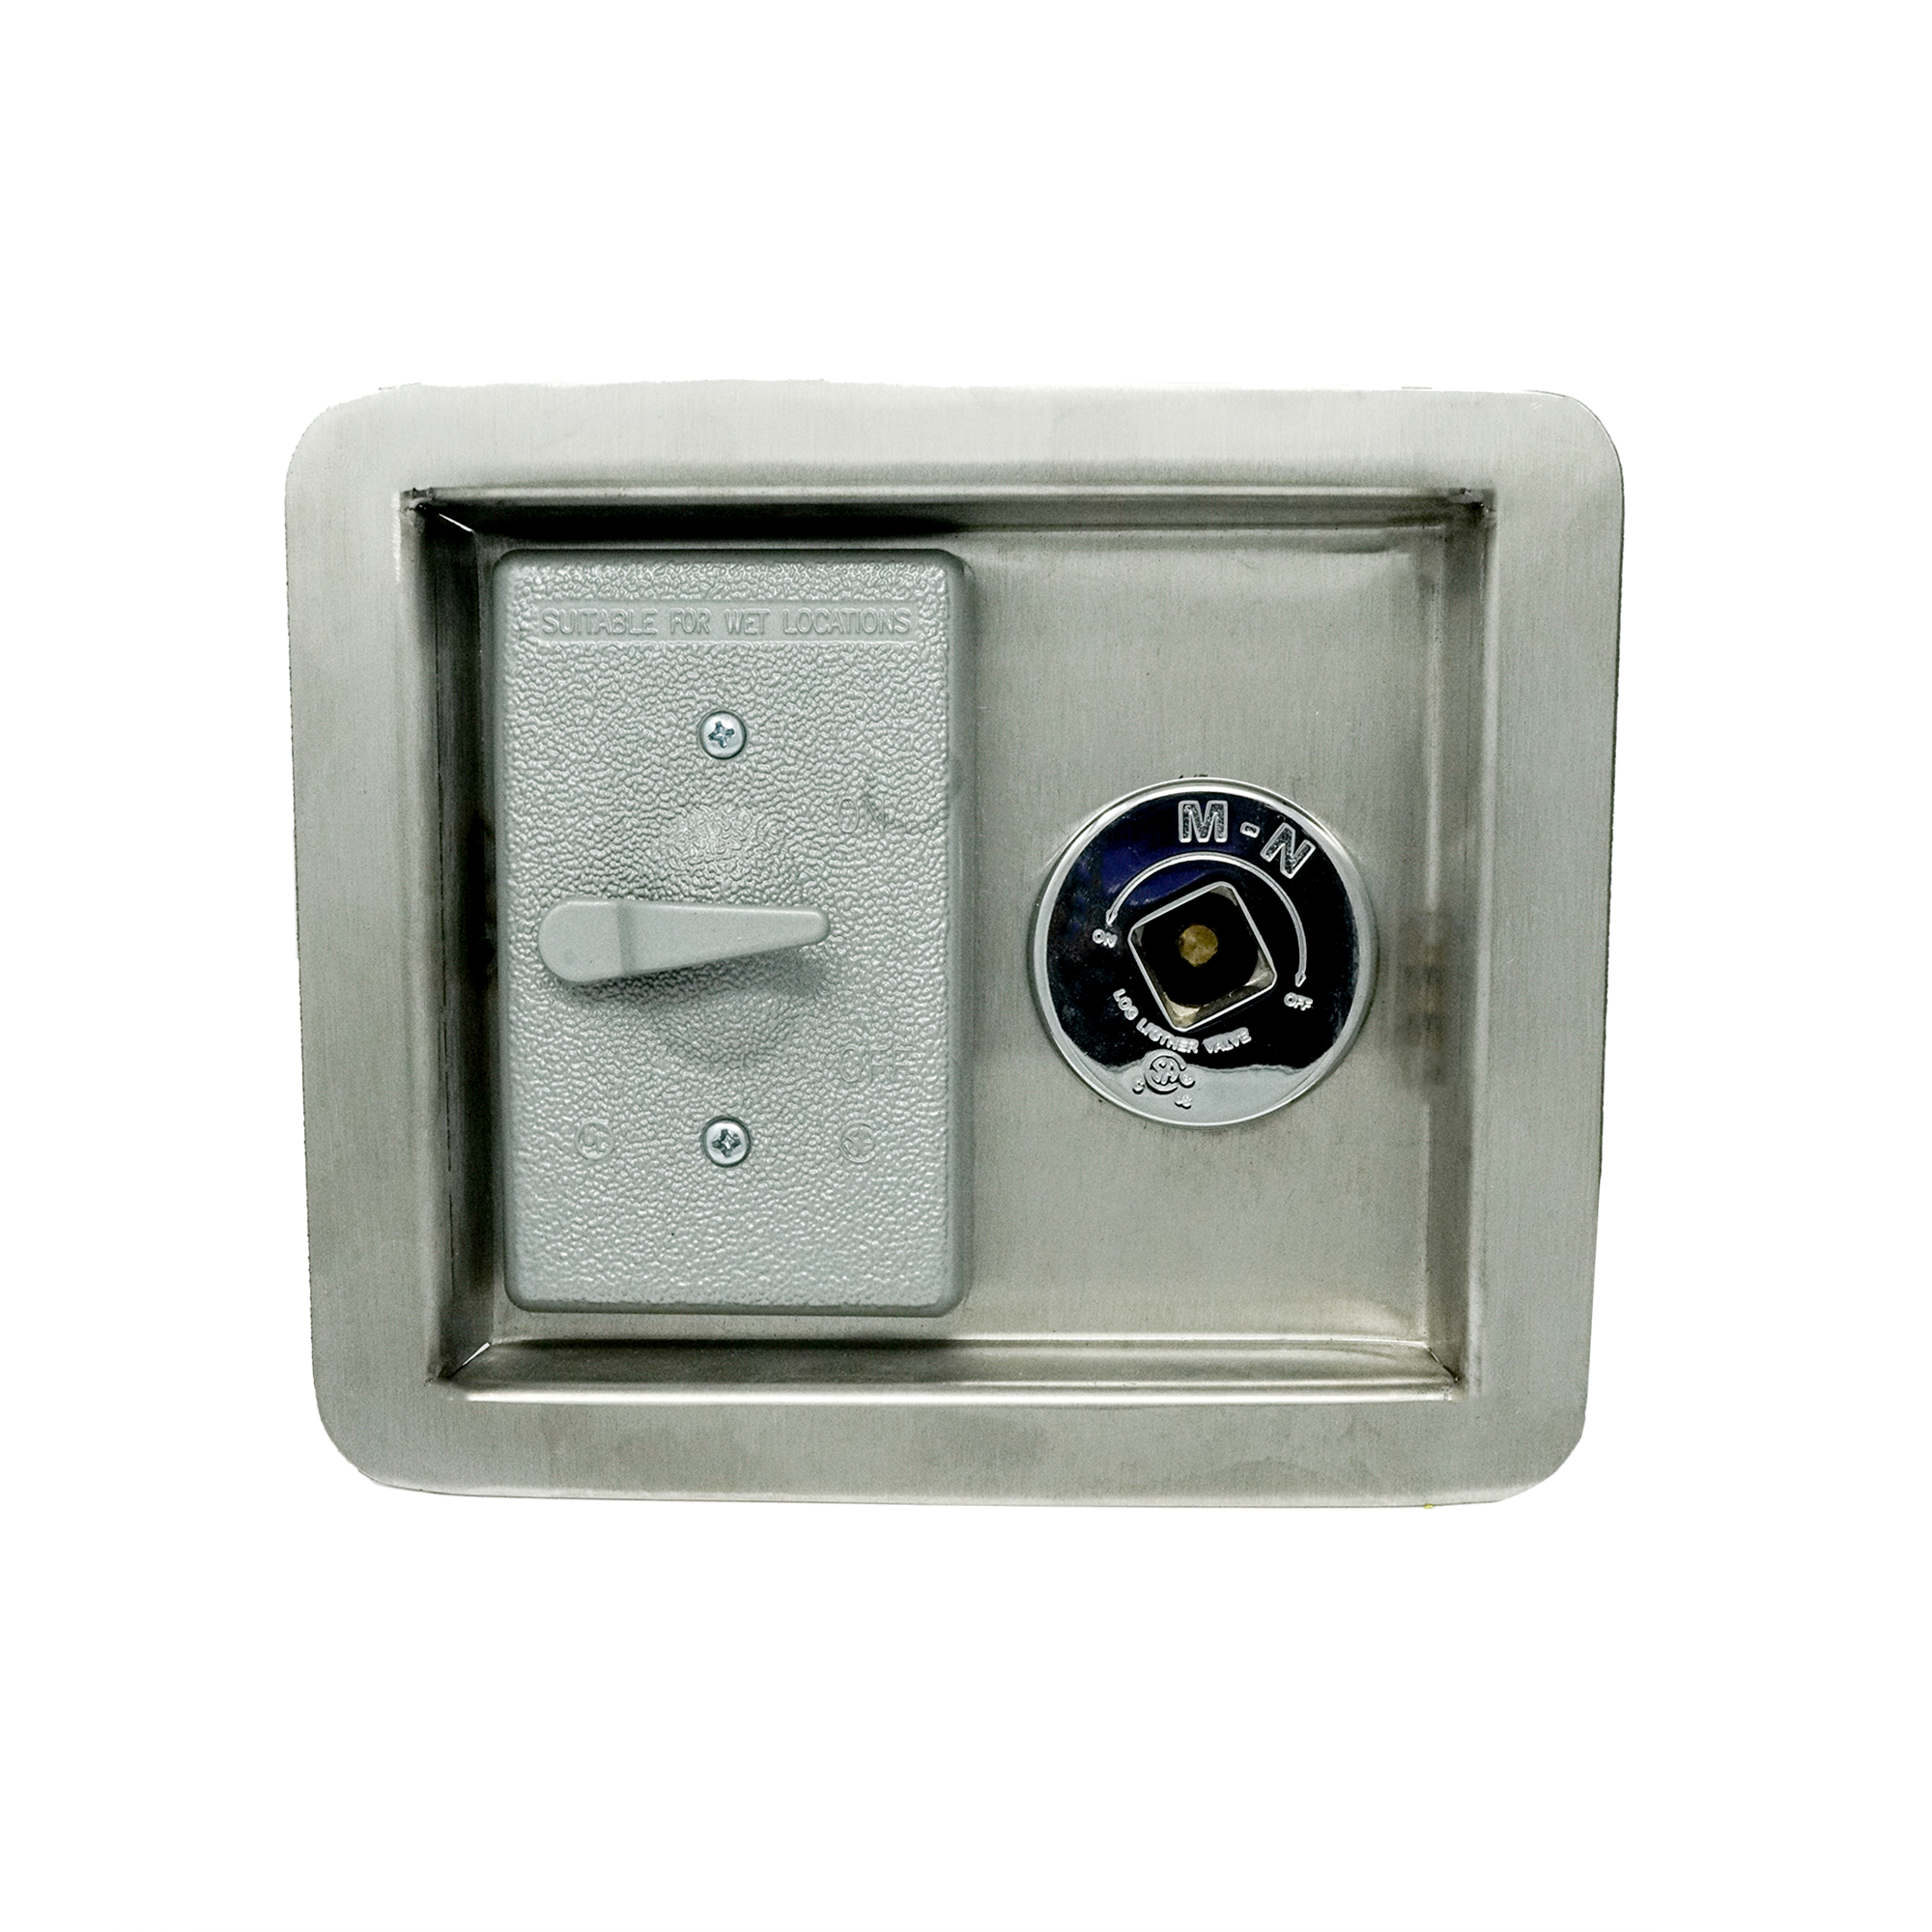 Waterproof Switch and Key Valve Panel copy